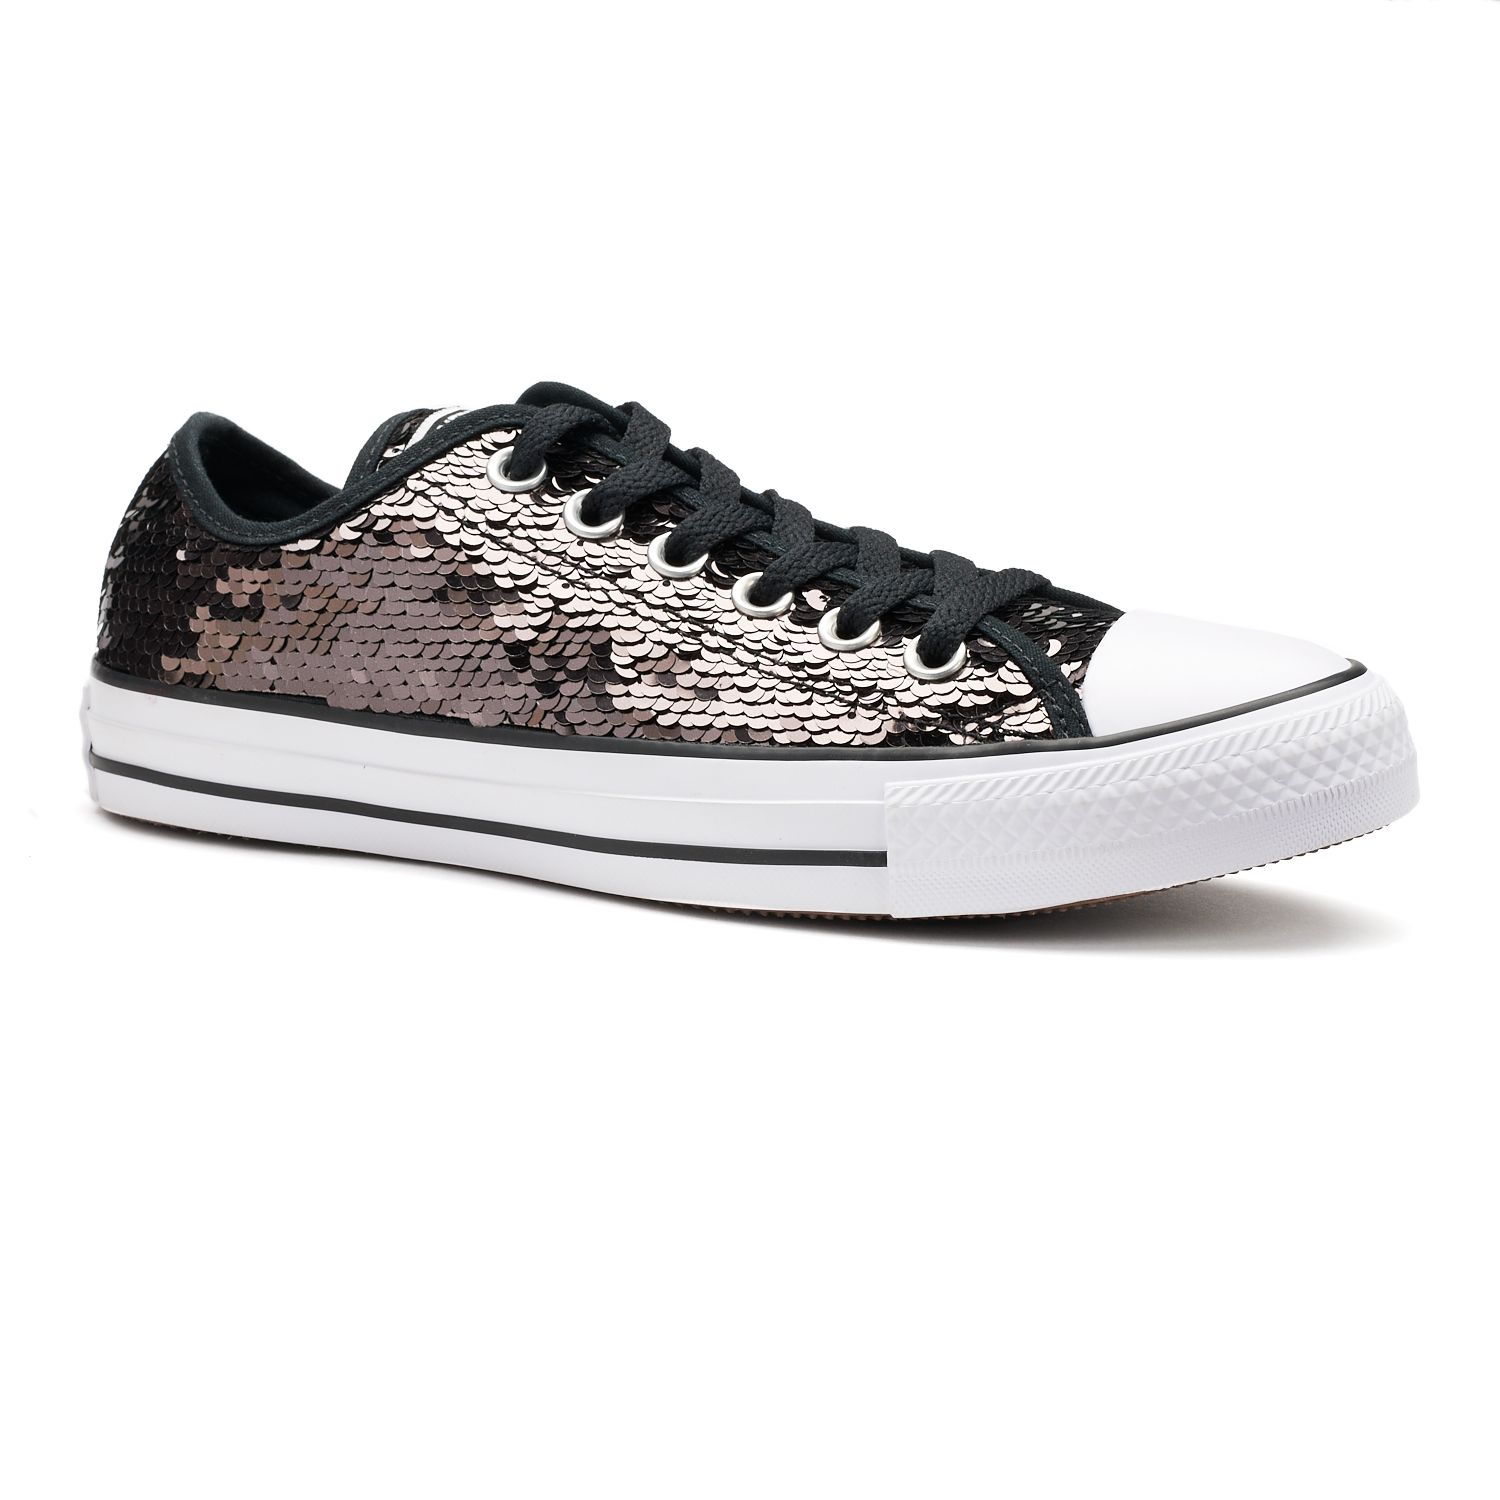 white sequin converse sneakers